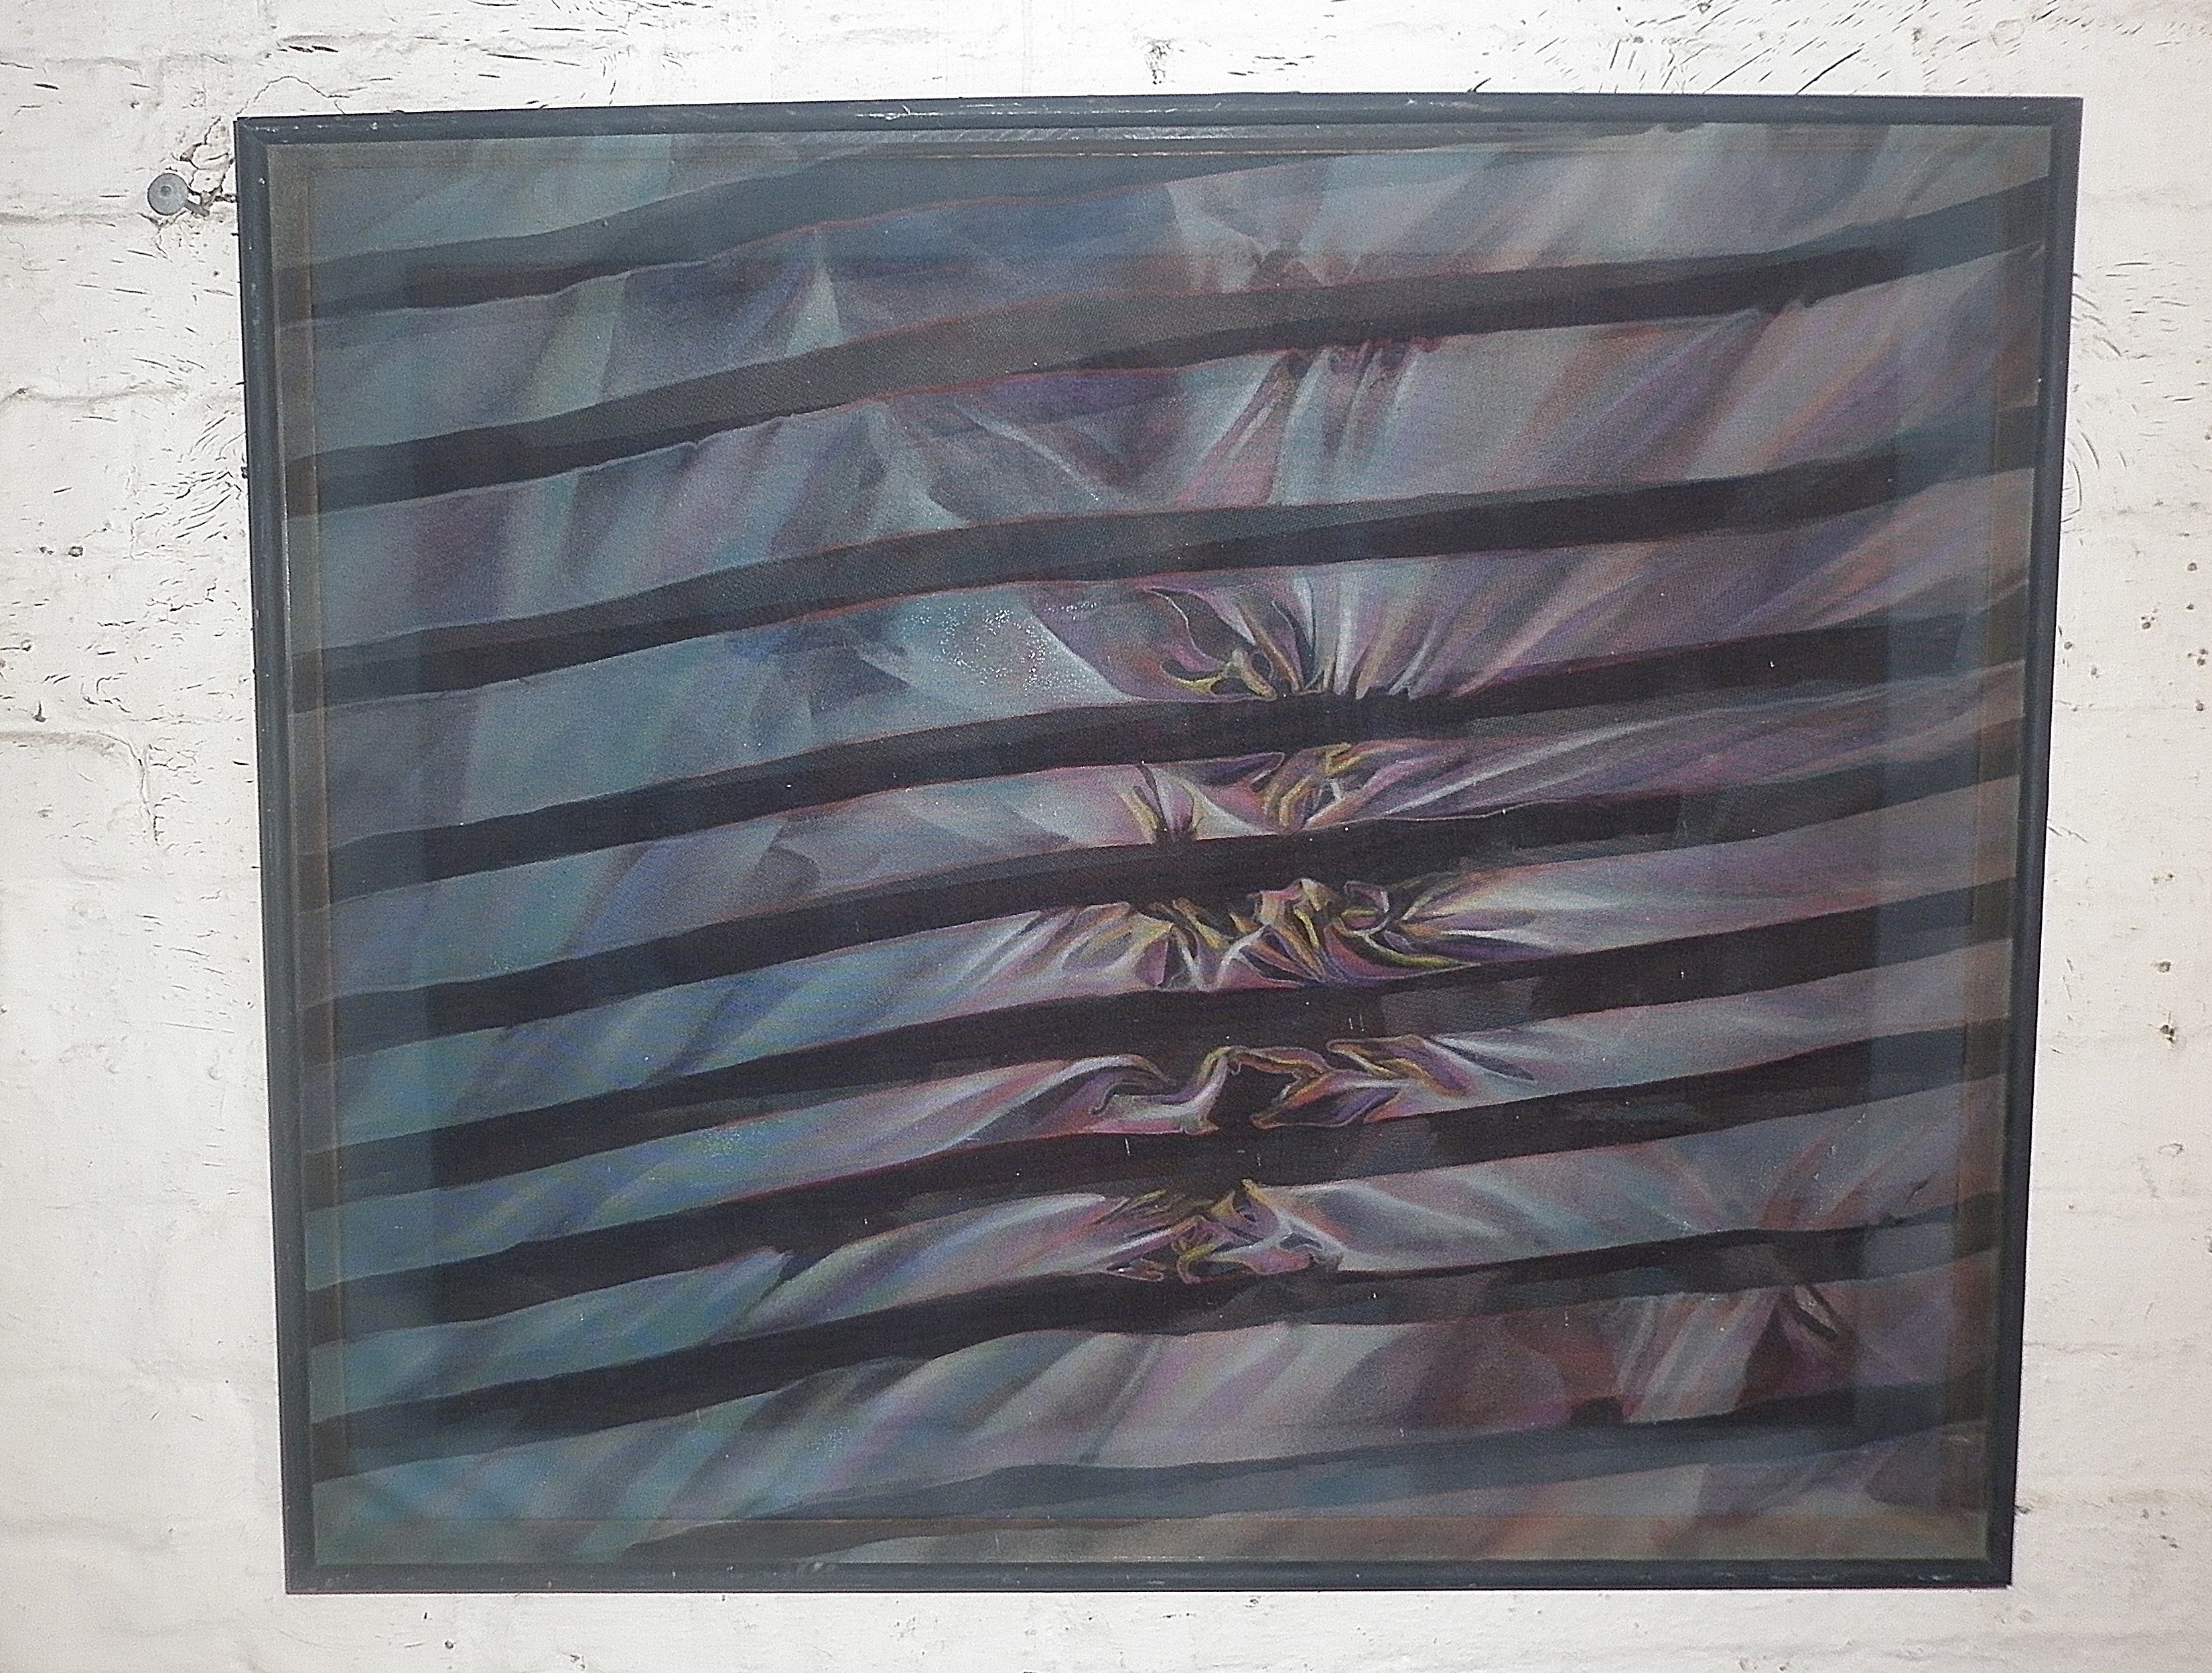 Contemporary abstract art work by Vicki Cox titled "Stripes in Space" multimedia with painted net